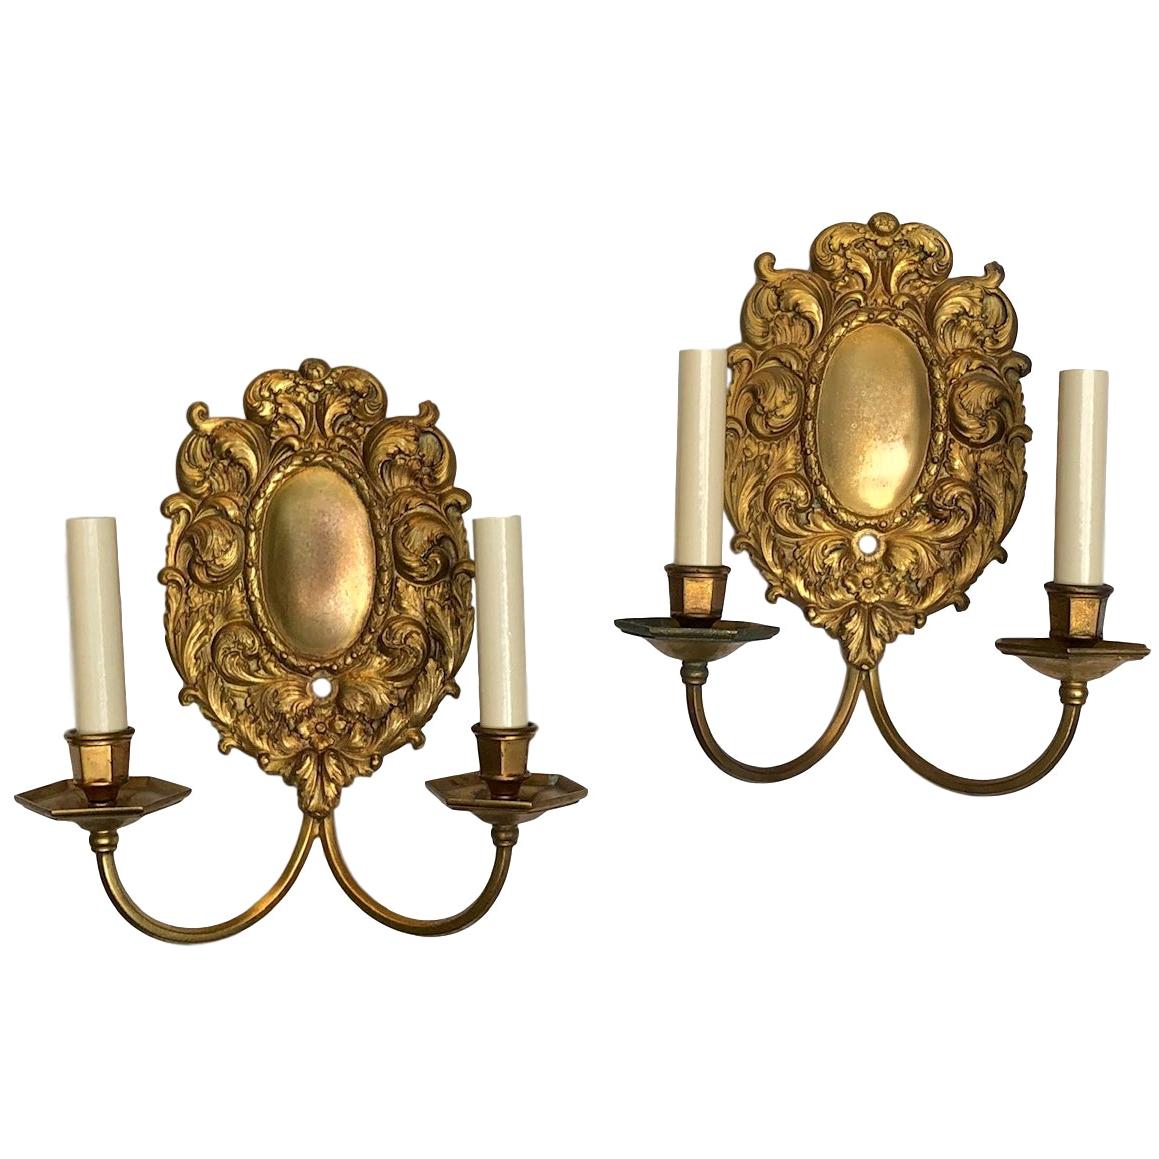 Set of Cast Bronze Caldwell Sconces, Sold in Pairs